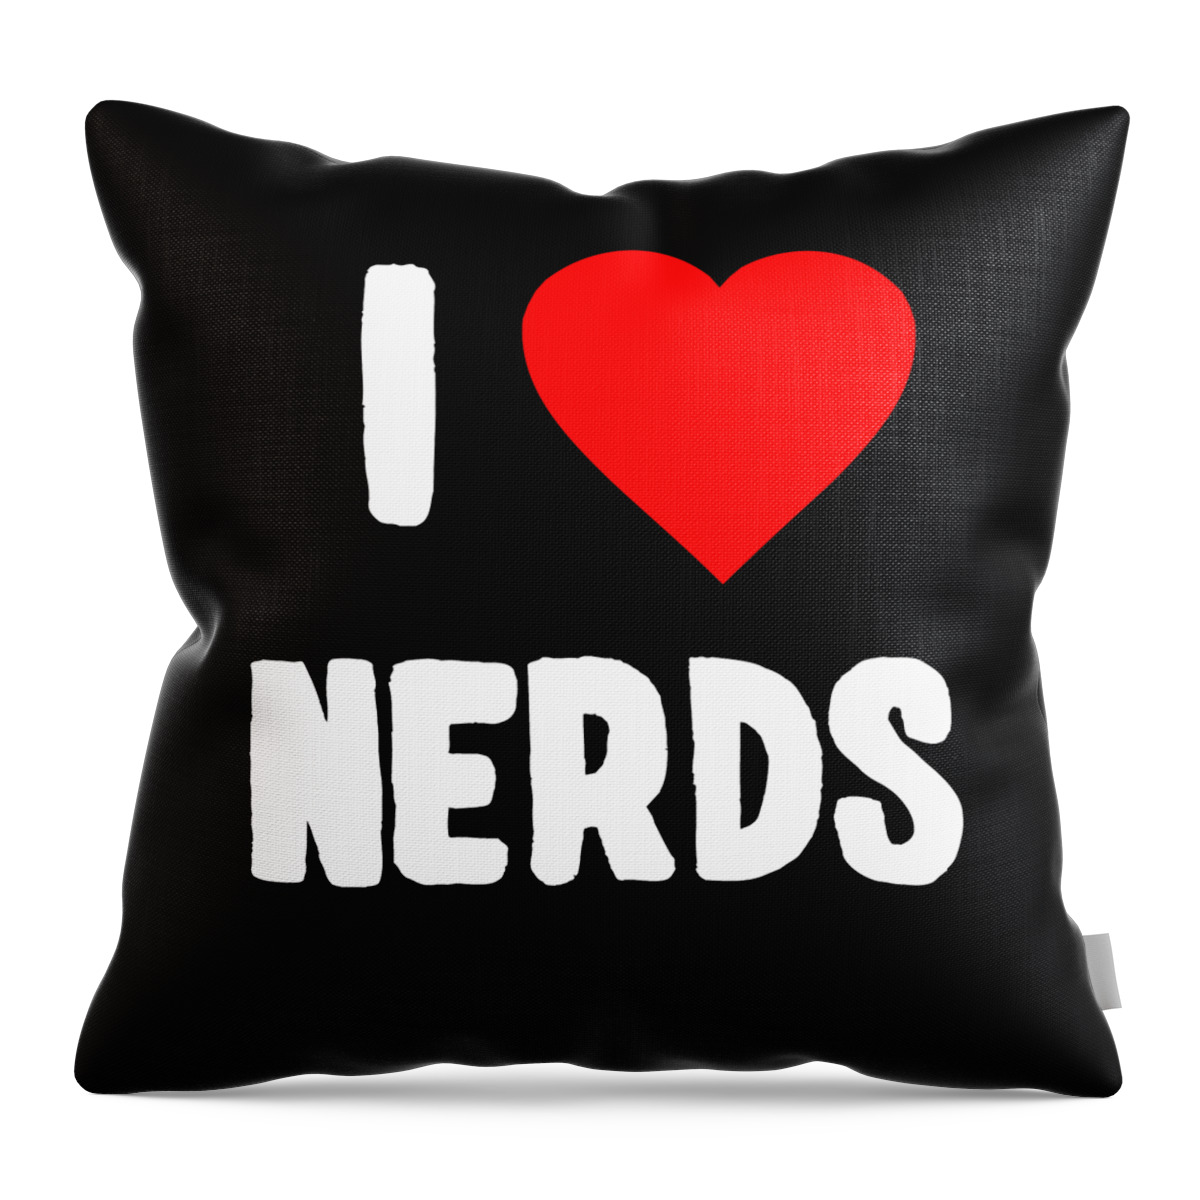 Funny Throw Pillow featuring the digital art I Love Nerds by Flippin Sweet Gear